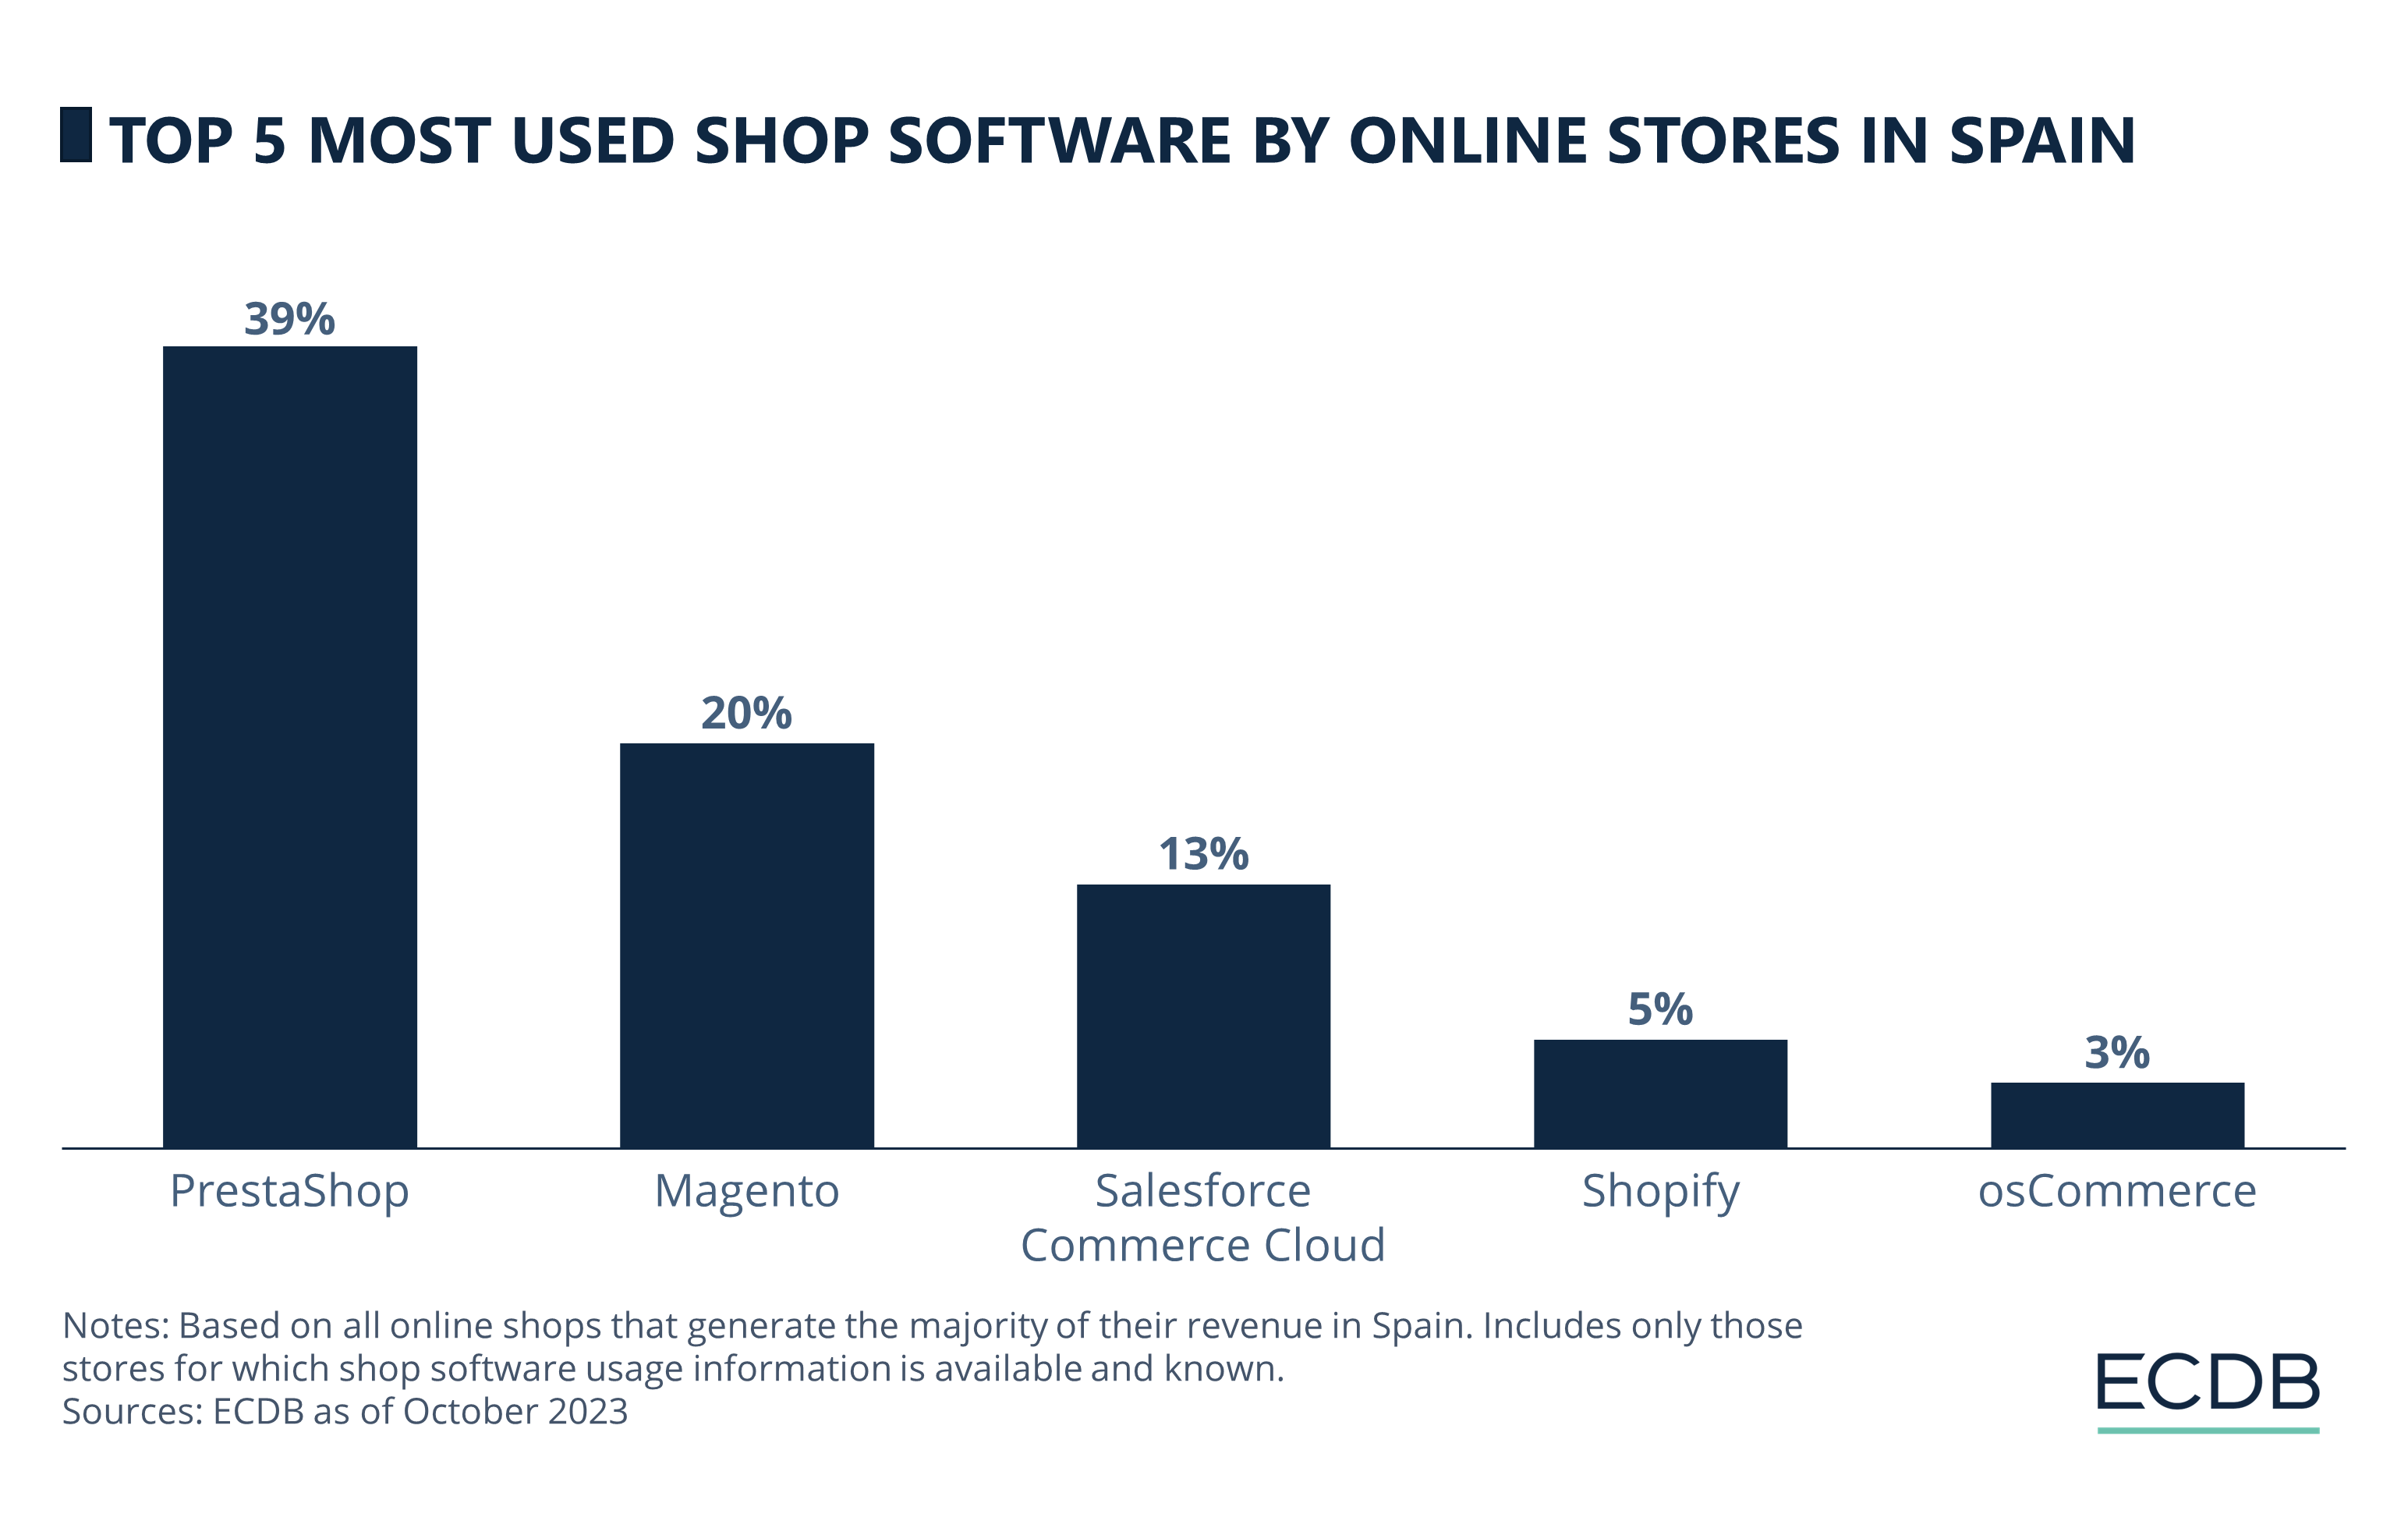 Top 5 Most Used Shop Software by Online Stores in Spain